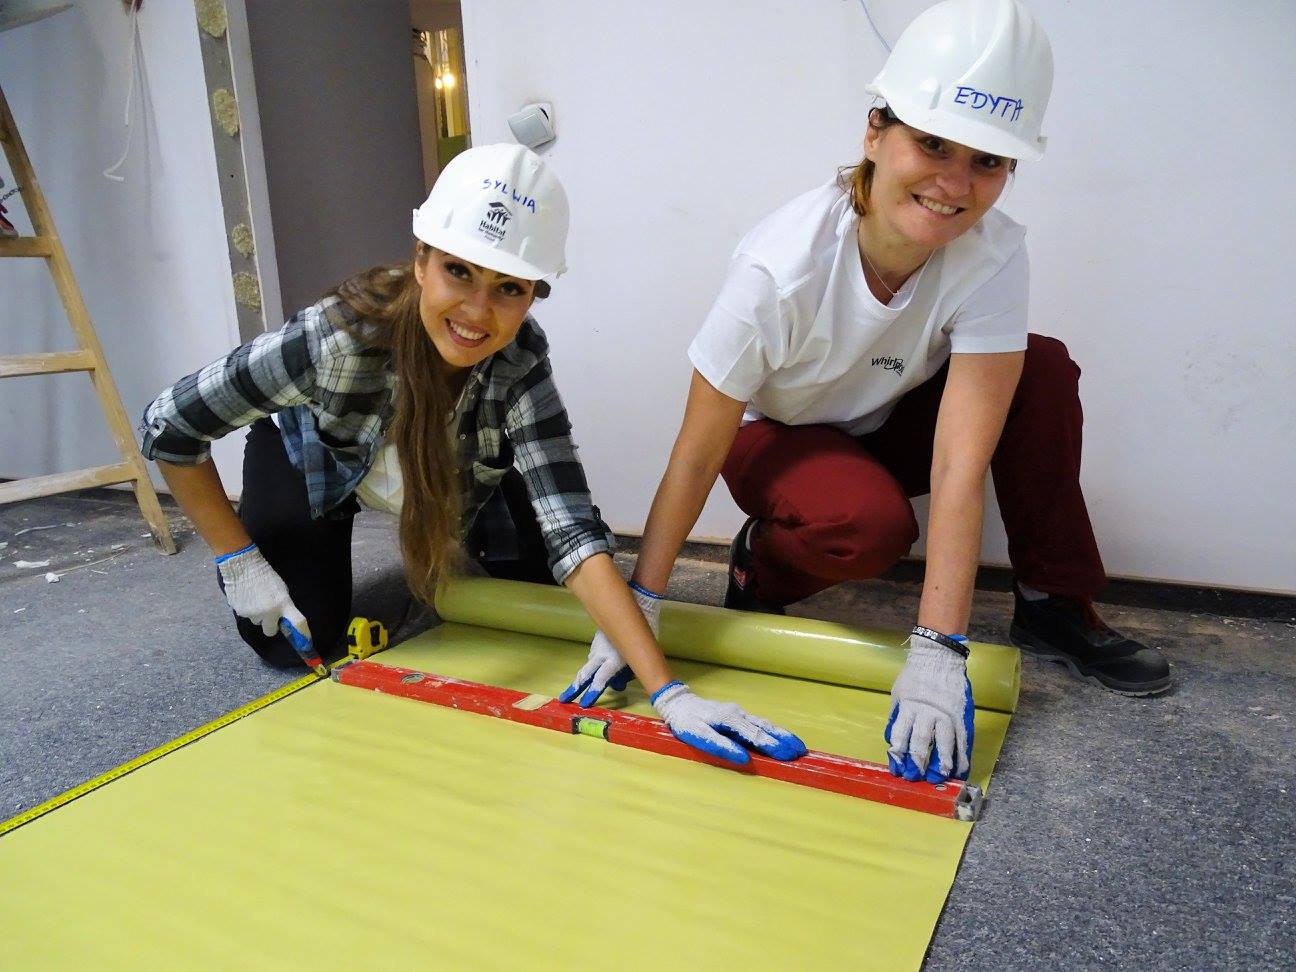 Whirlpool EMEA and Habitat for Humanity Poland together to help those in need